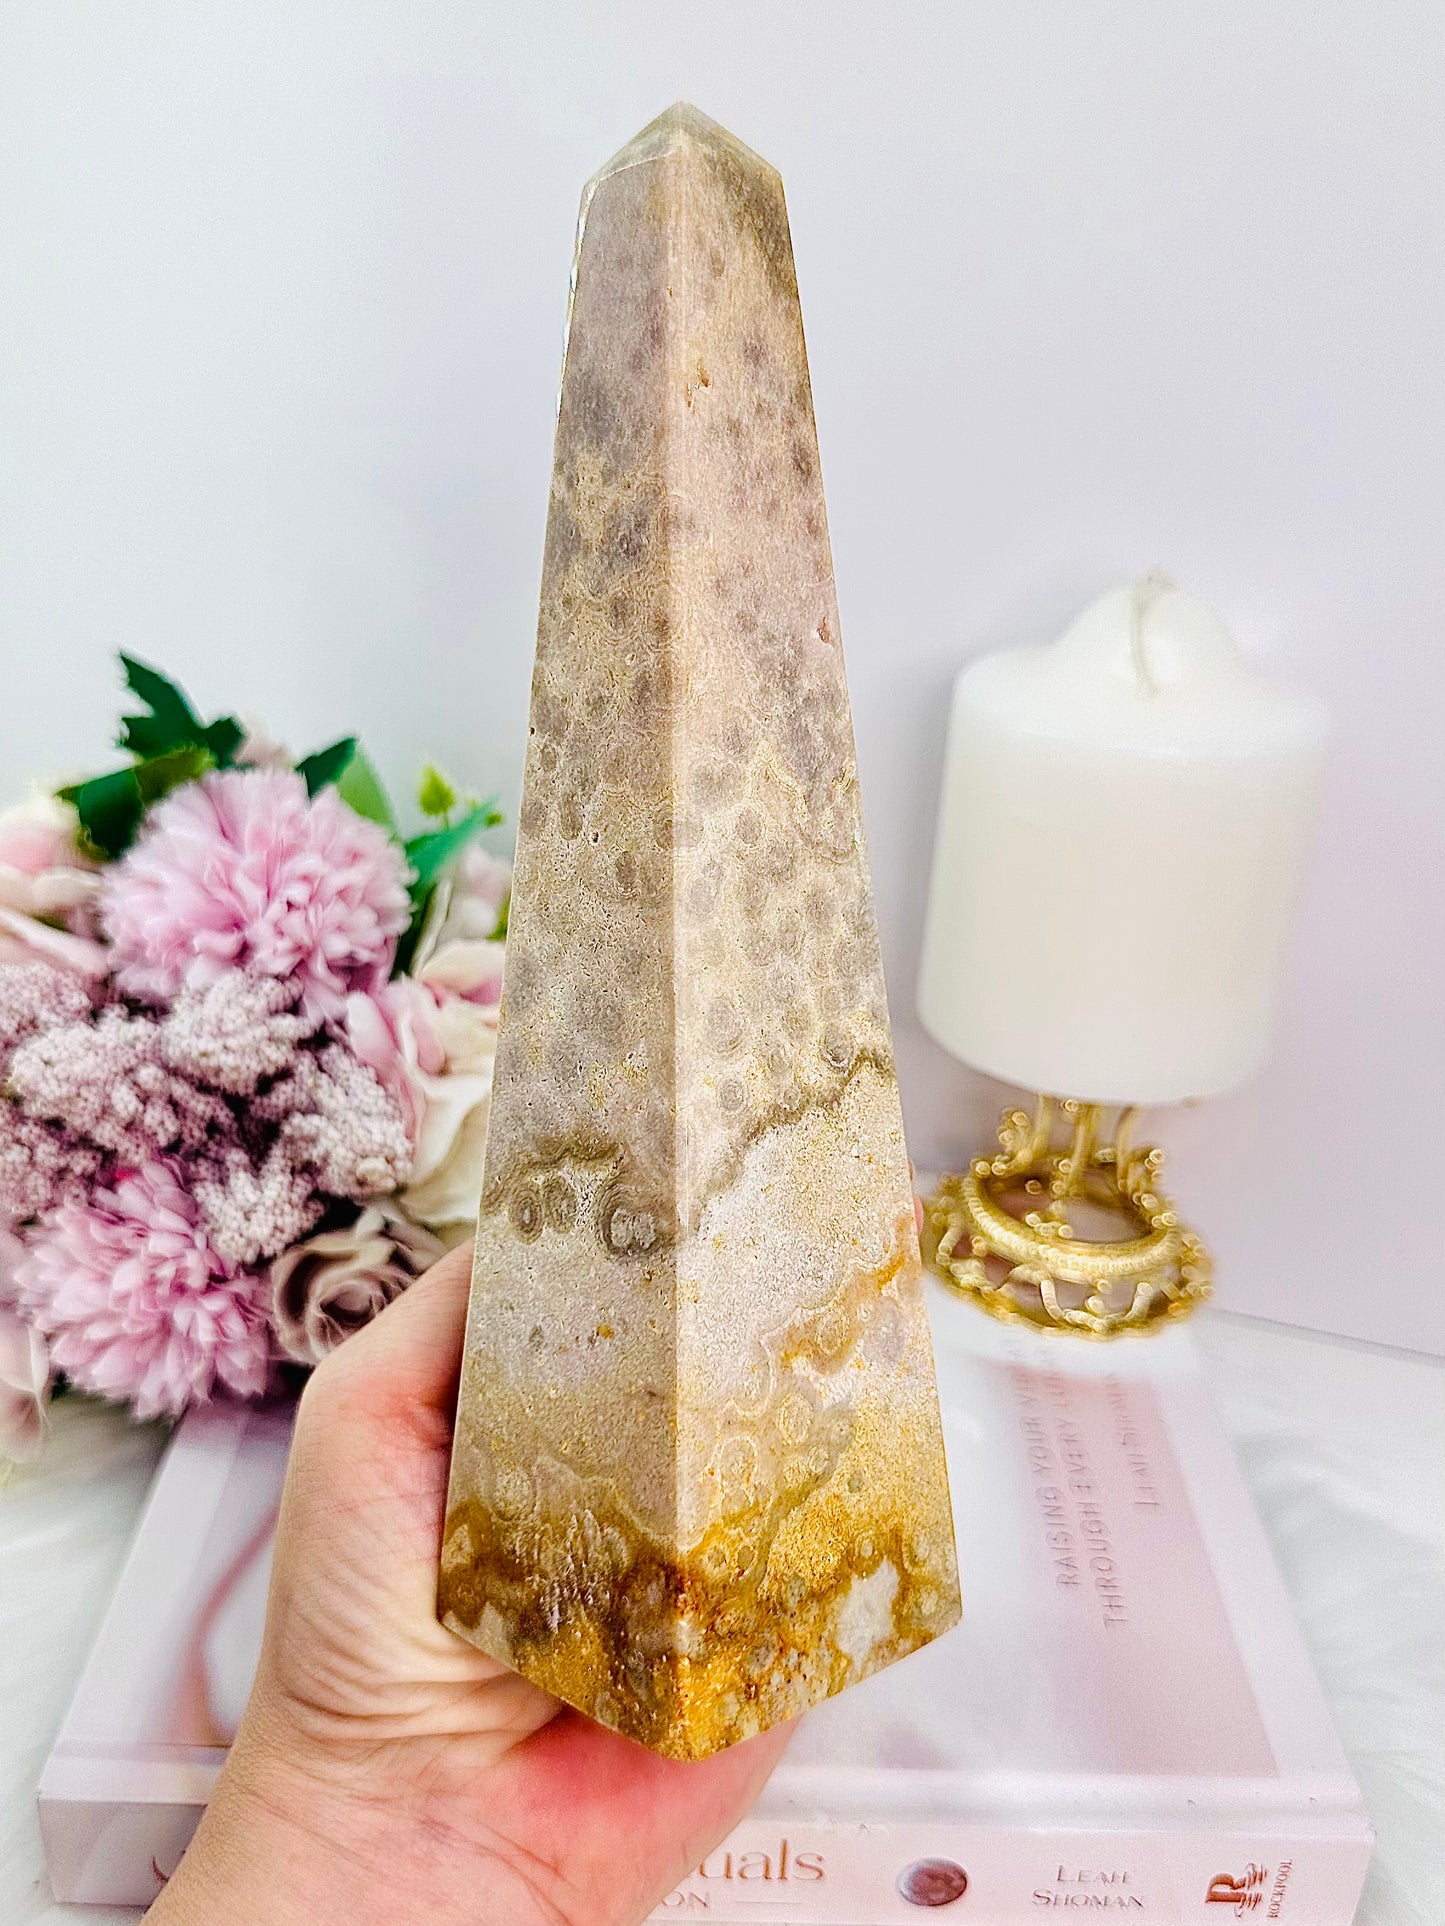 Classy & Truly Unique Large 20cm 668gram Pink Amethyst Obelisk | Tower From Brazil